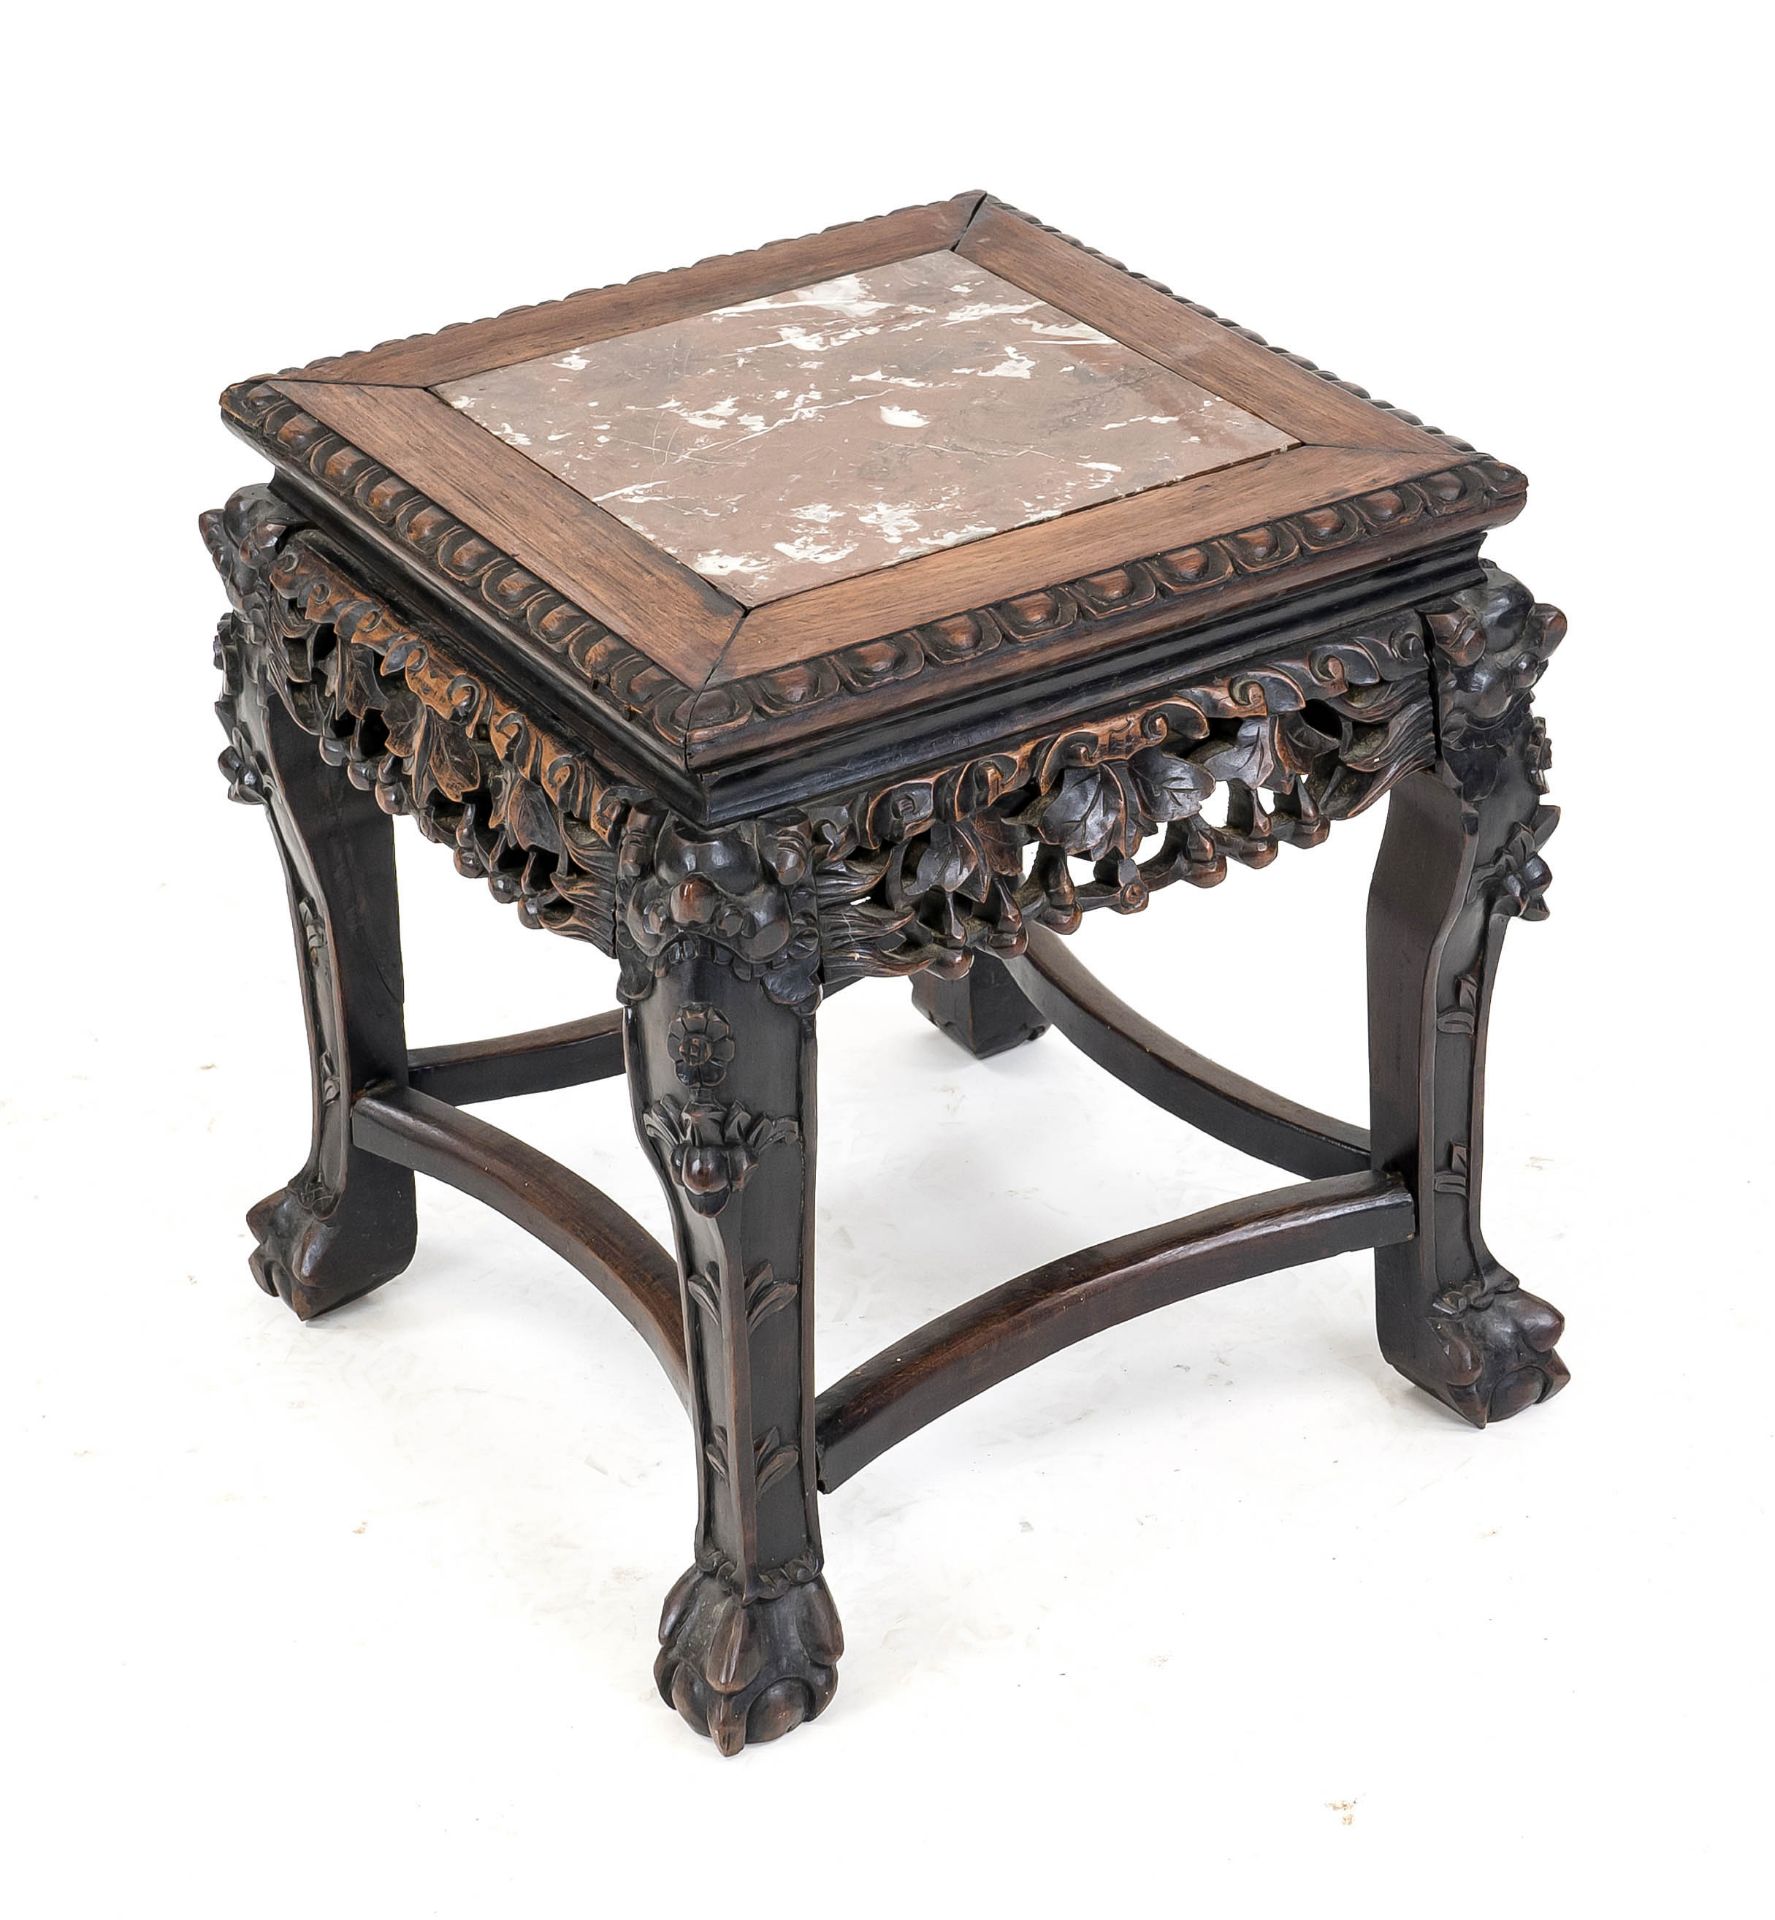 Small table, Asia, early 20th century, dark hardwood with stone inlay. Open-worked and